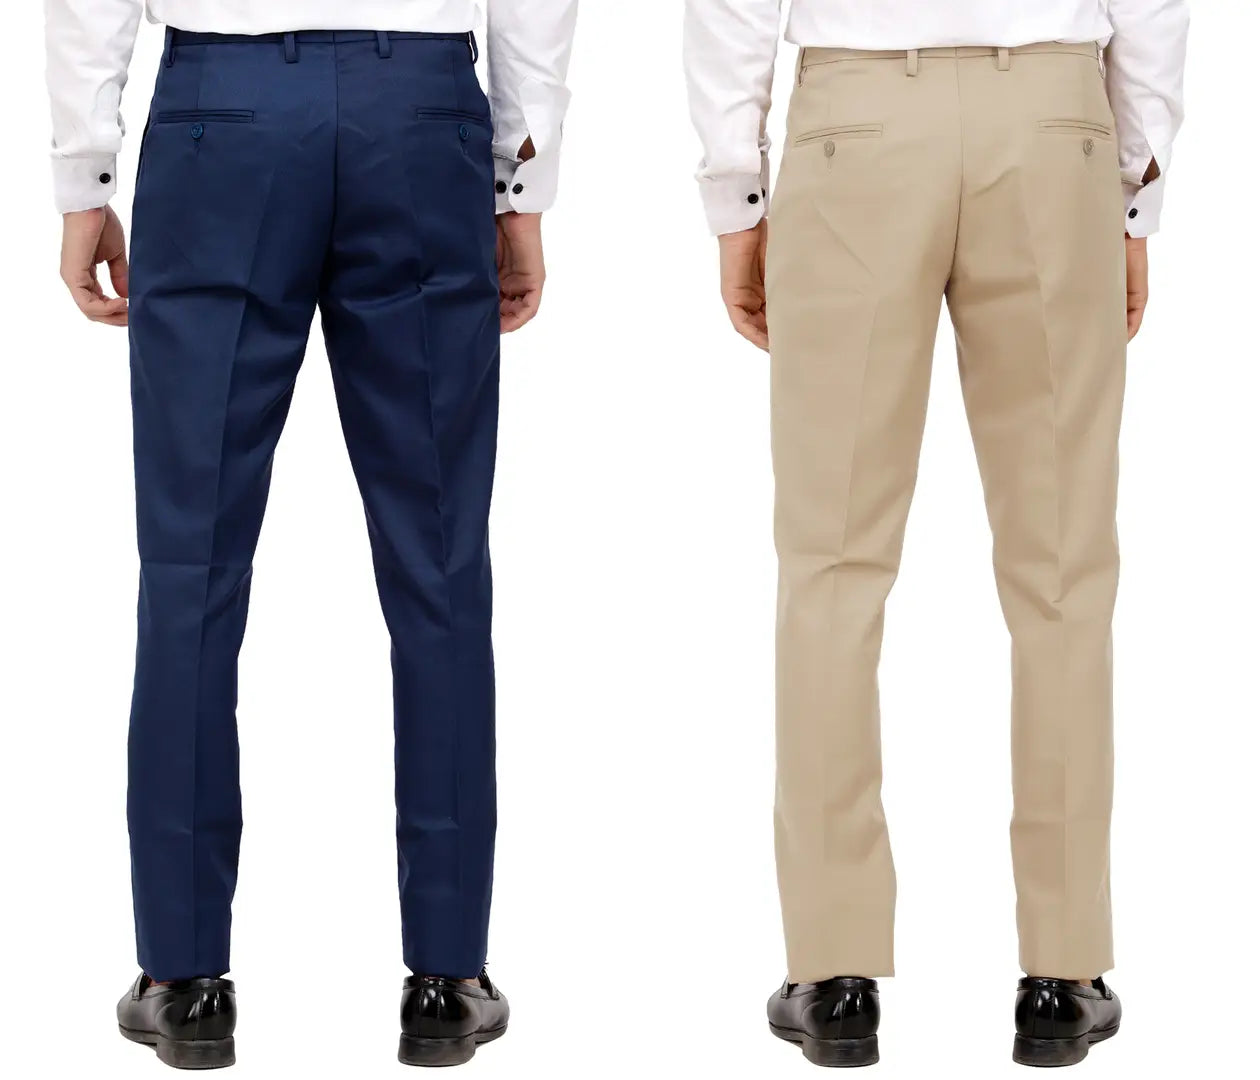 Kundan Men Poly-Viscose Blended Navy Blue and Beige Formal Trousers ( Pack of 2 Trousers )